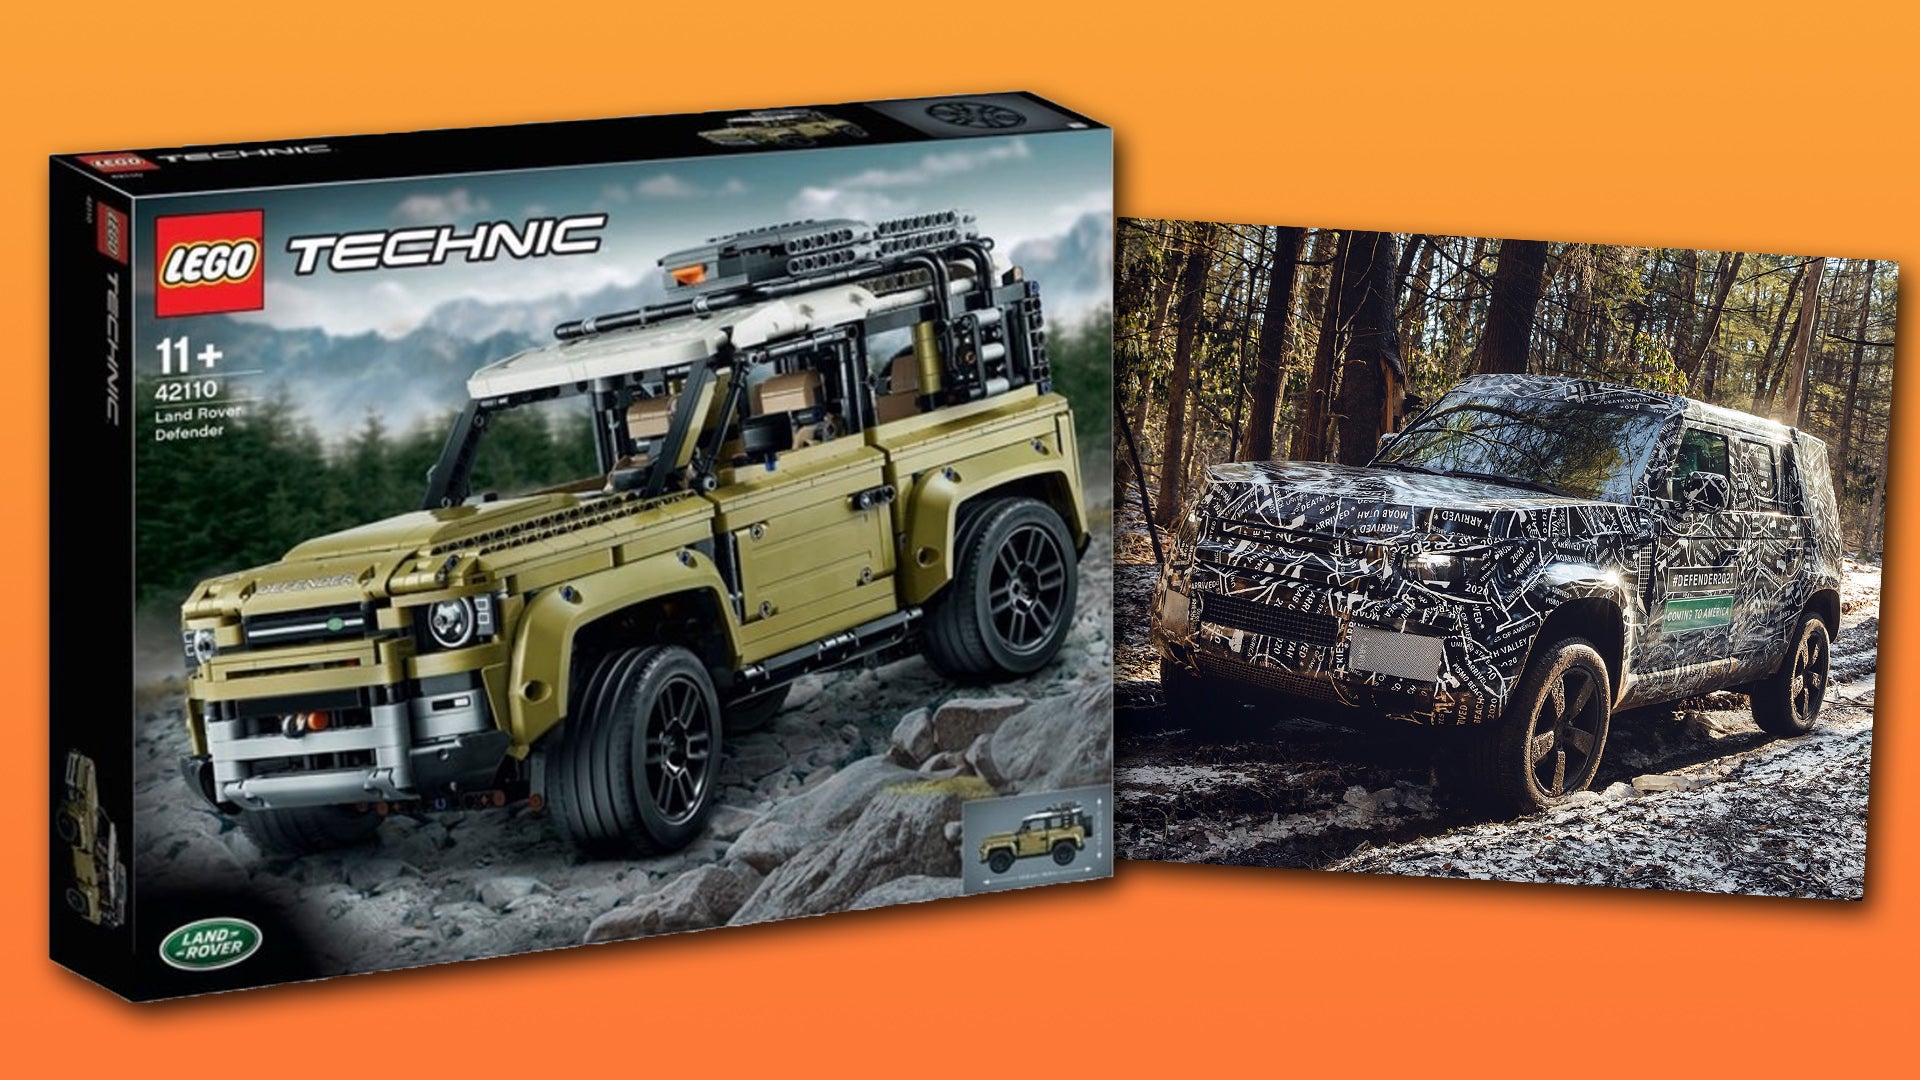 This New Lego Might Have Leaked the Land Rover Defender